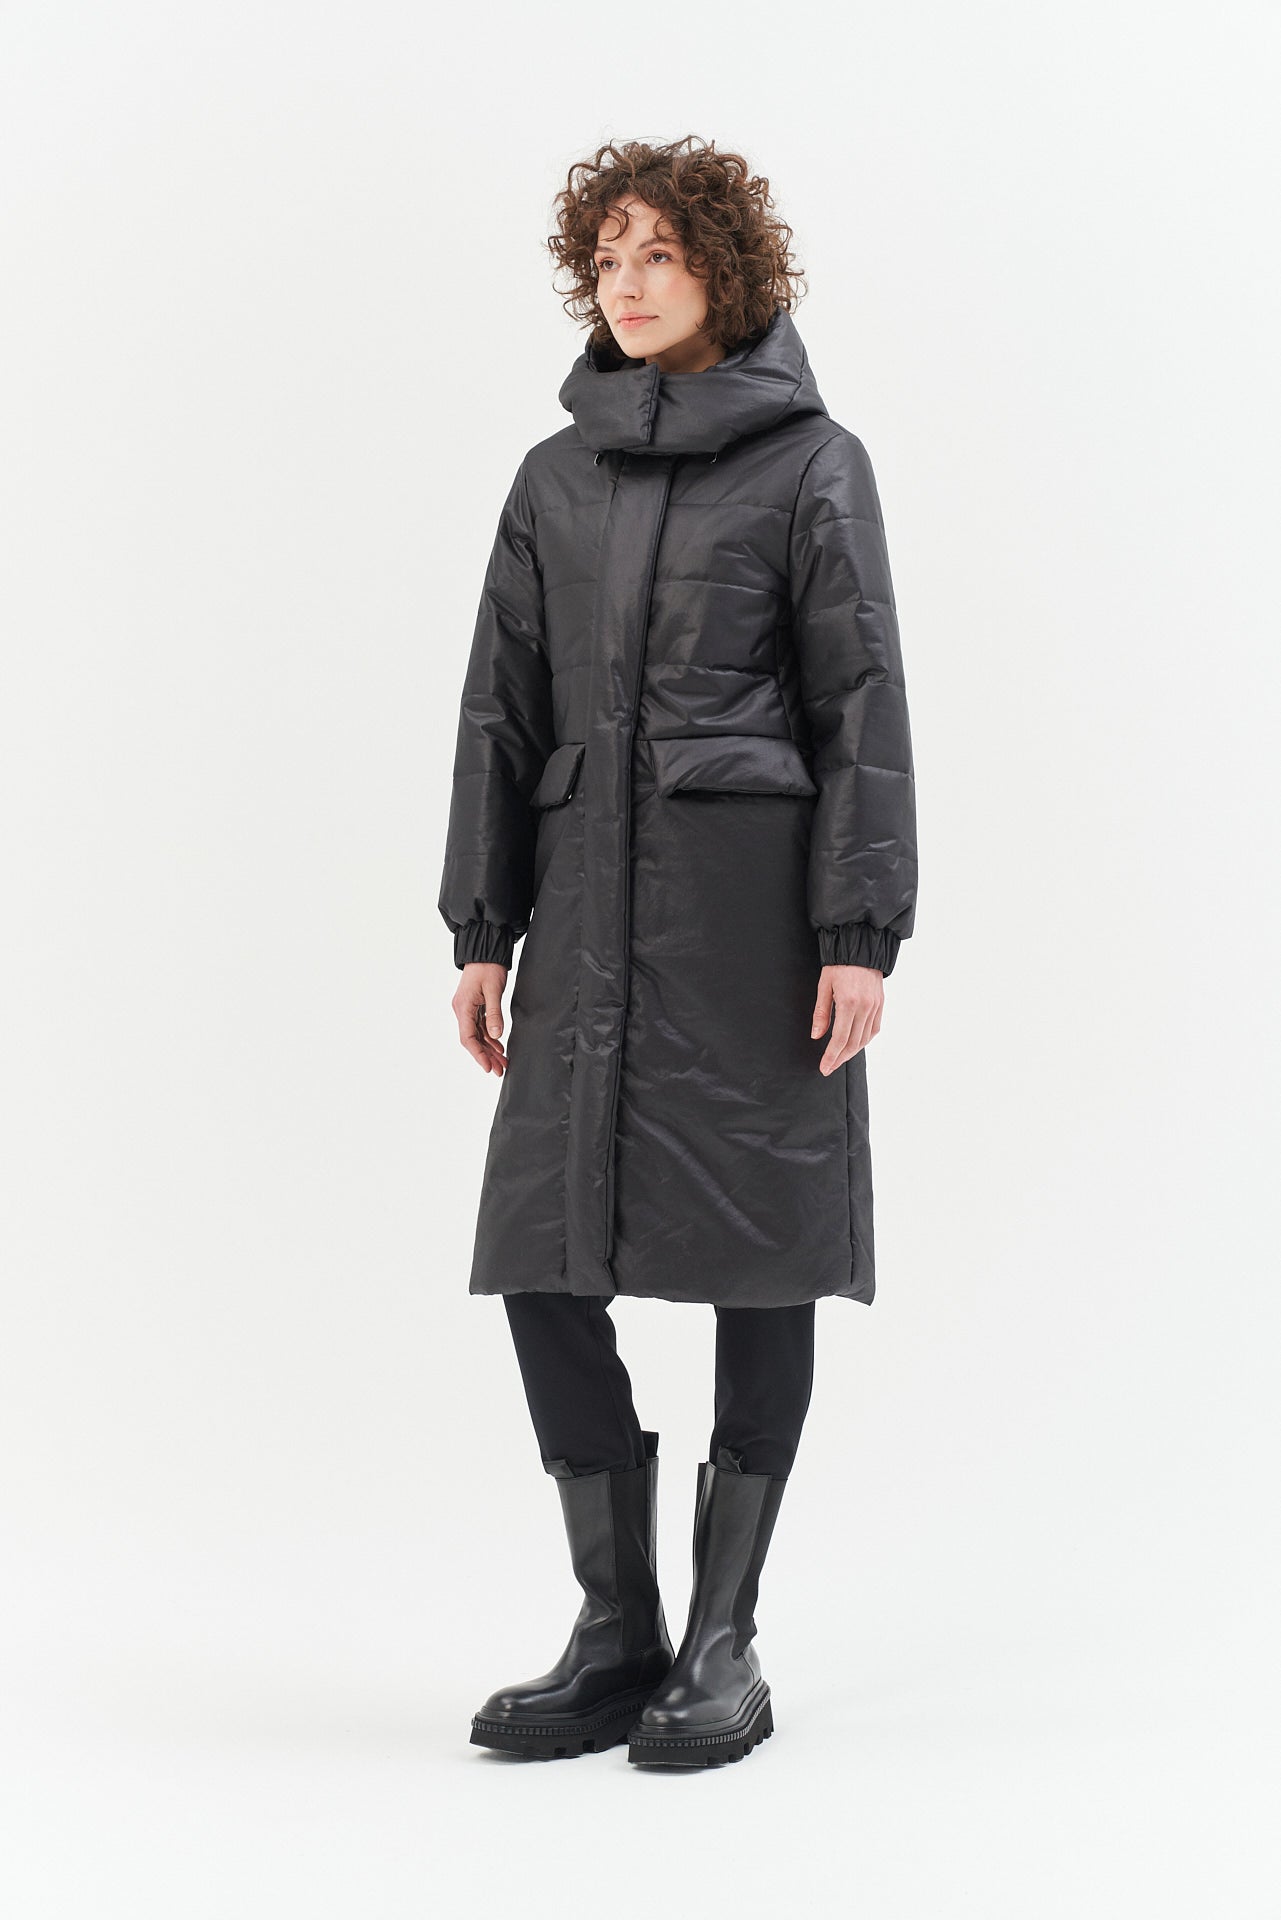 BLACK MIDI COAT PADDED WITH CAMEL WOOL AND MEIDA